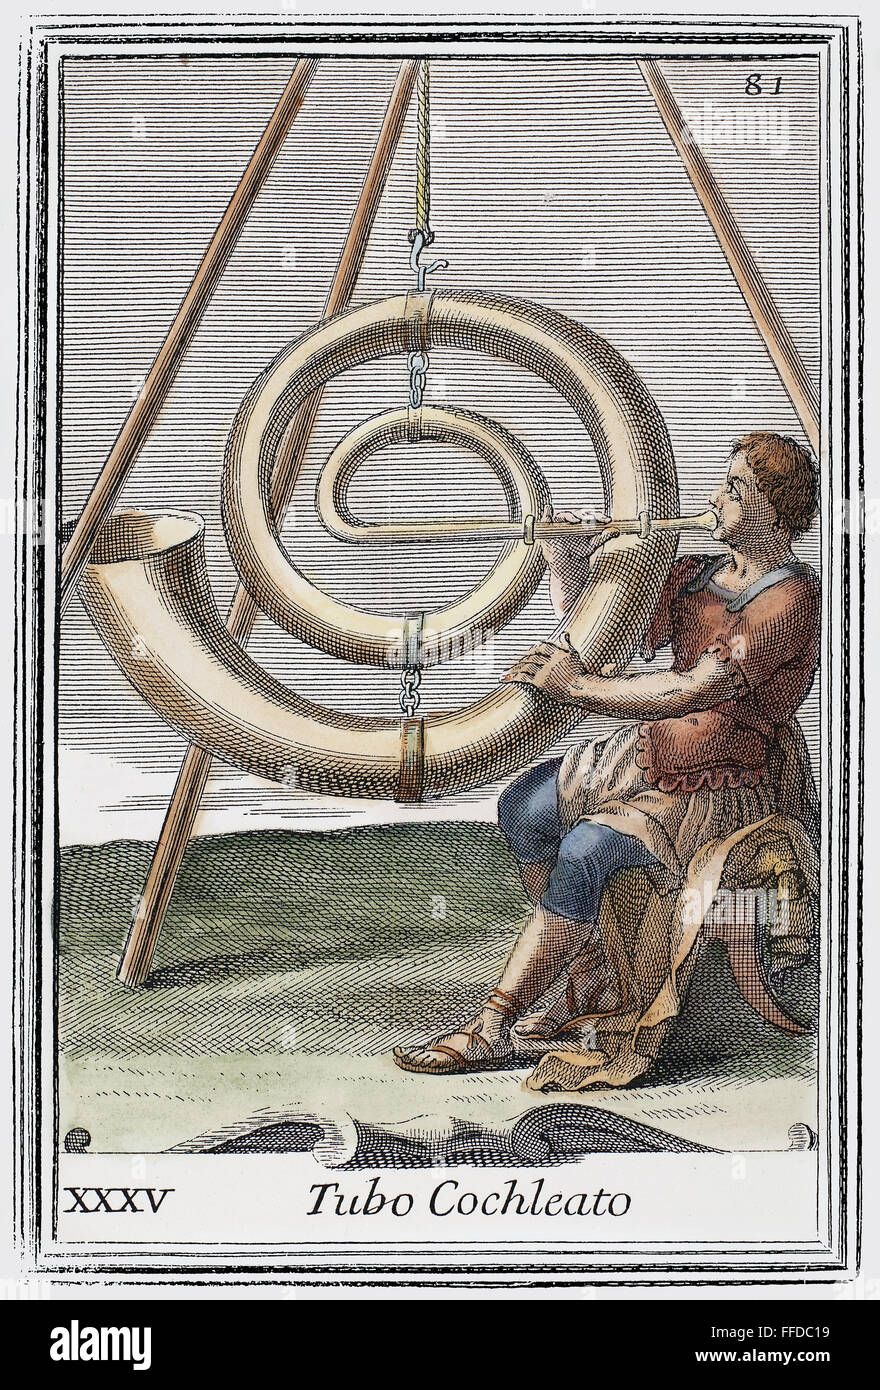 VOICE AMPLIFIER, 1723. /nAn imaginary voice amplifier, based on the ideas of Athanasius Kircher. Copper engraving, 1723, by Arnold van Westerhout. Stock Photo